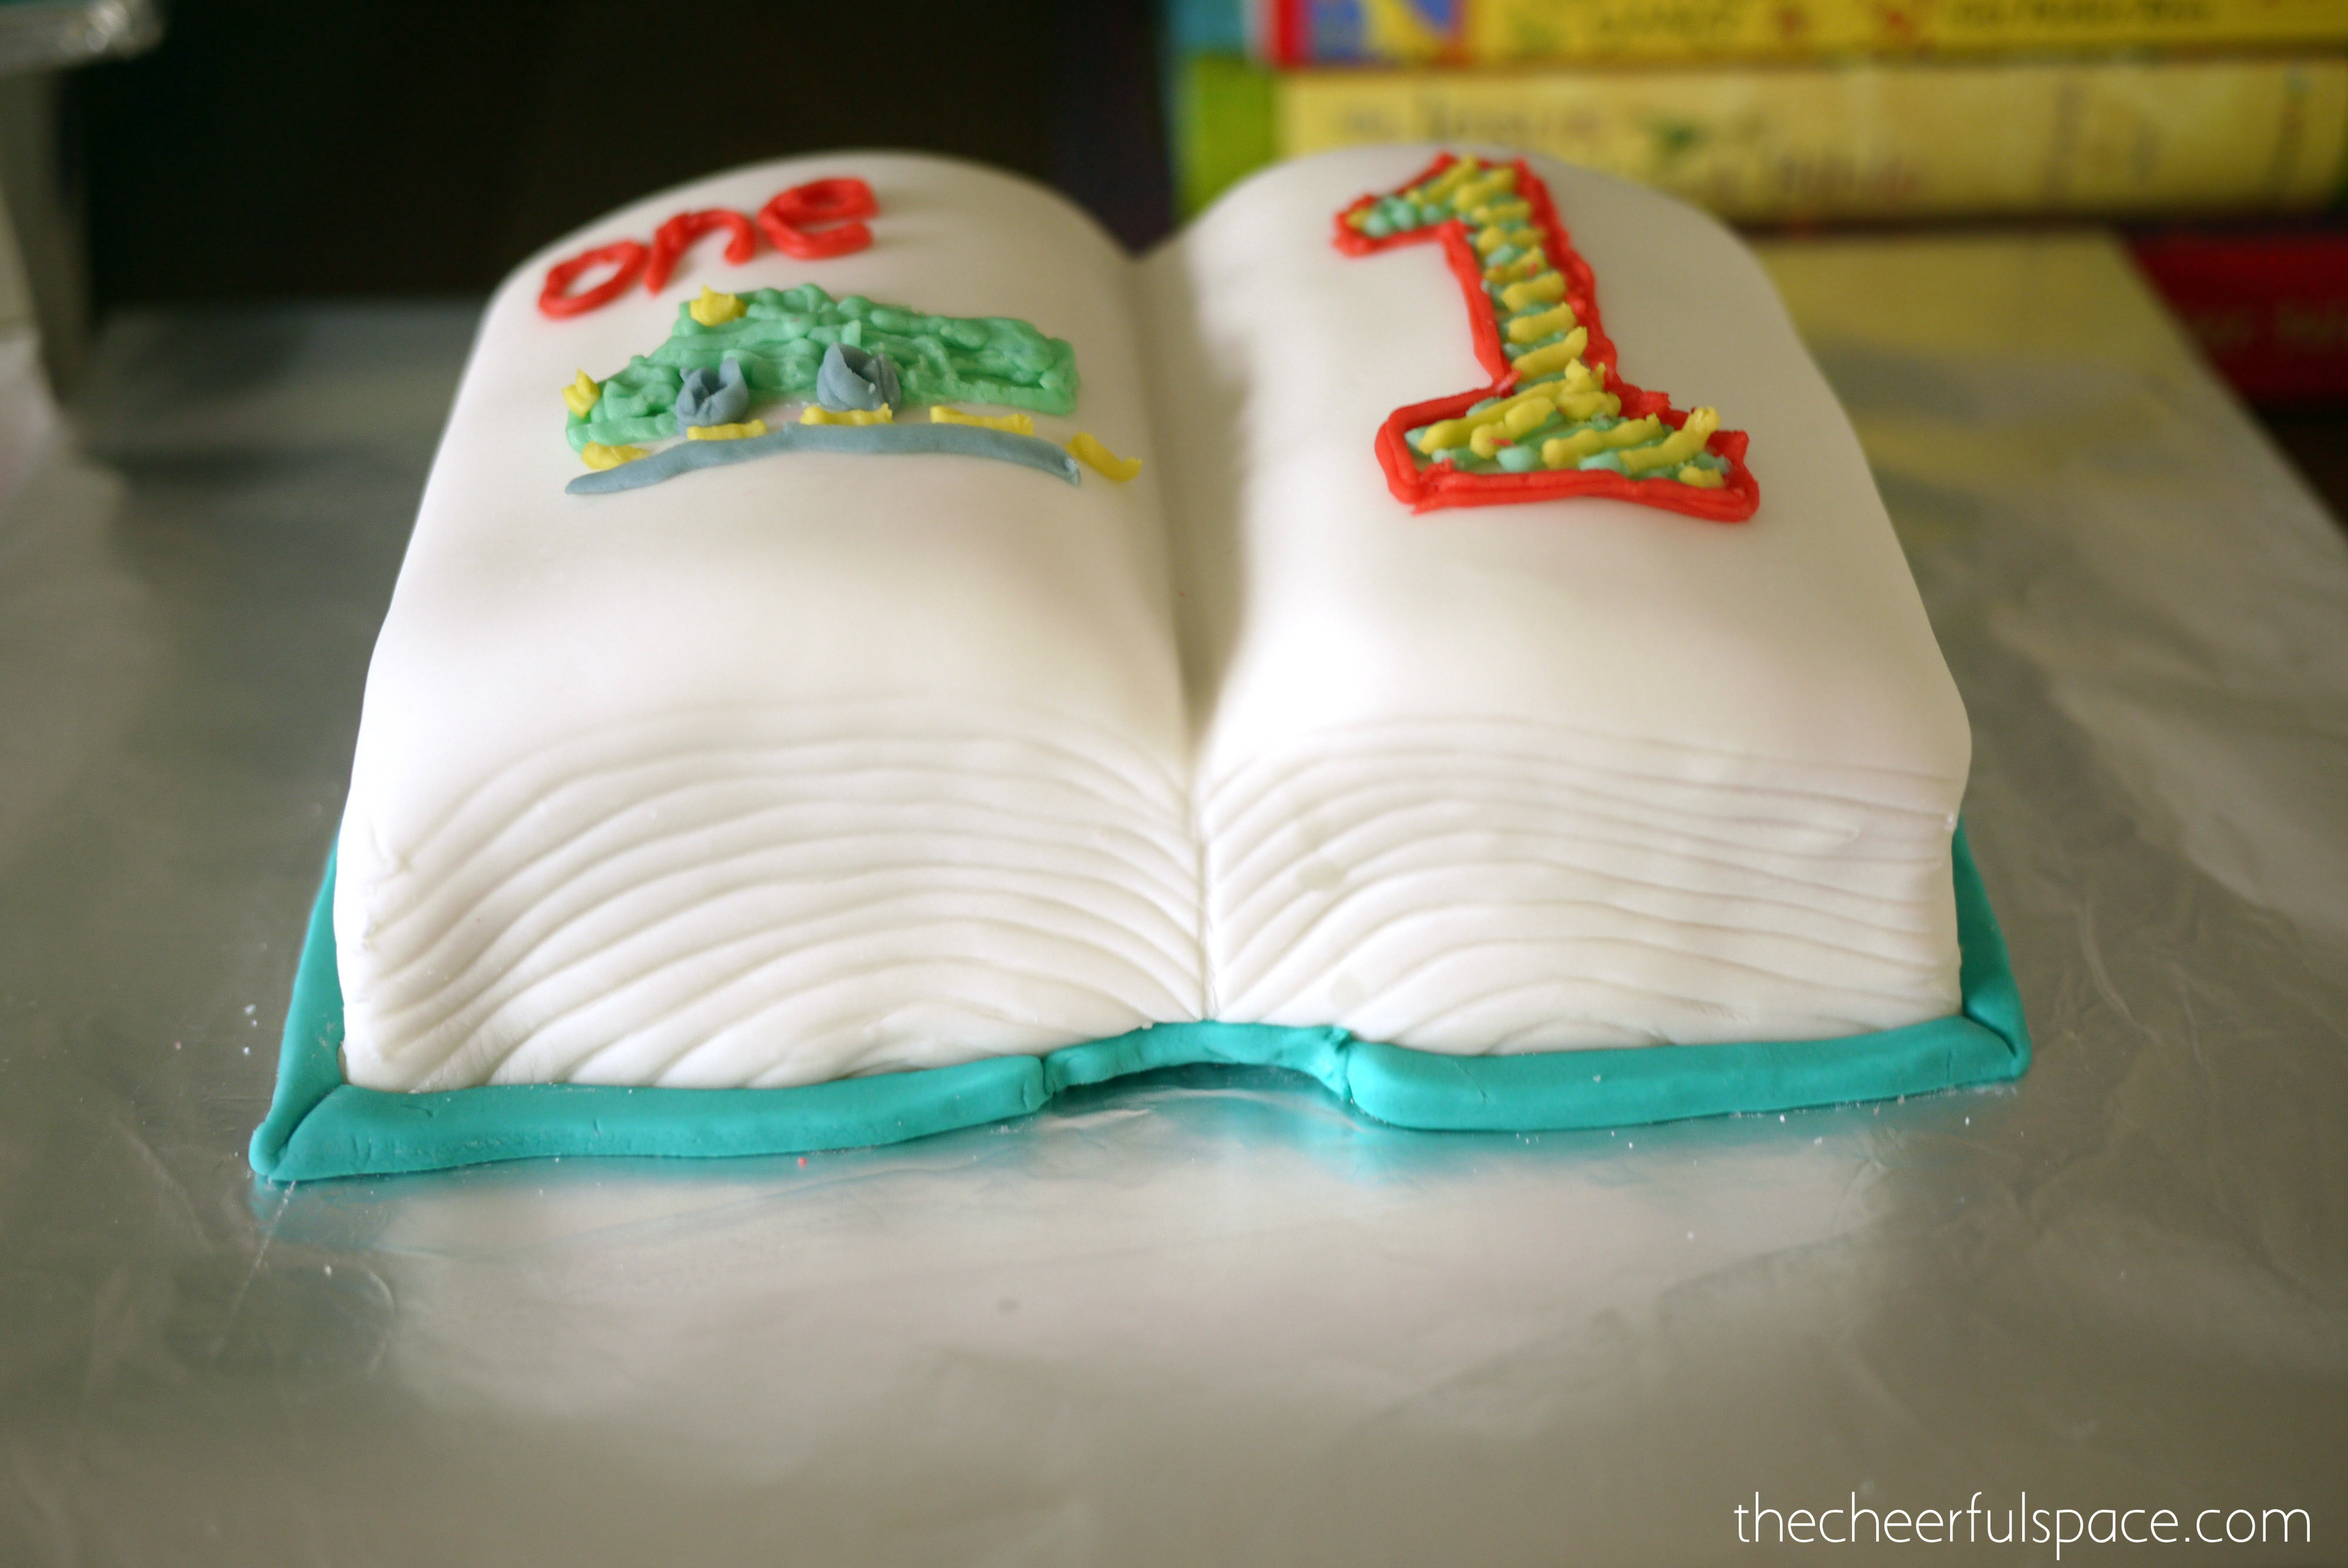 How To Make Book Cakes The Cheerful Space